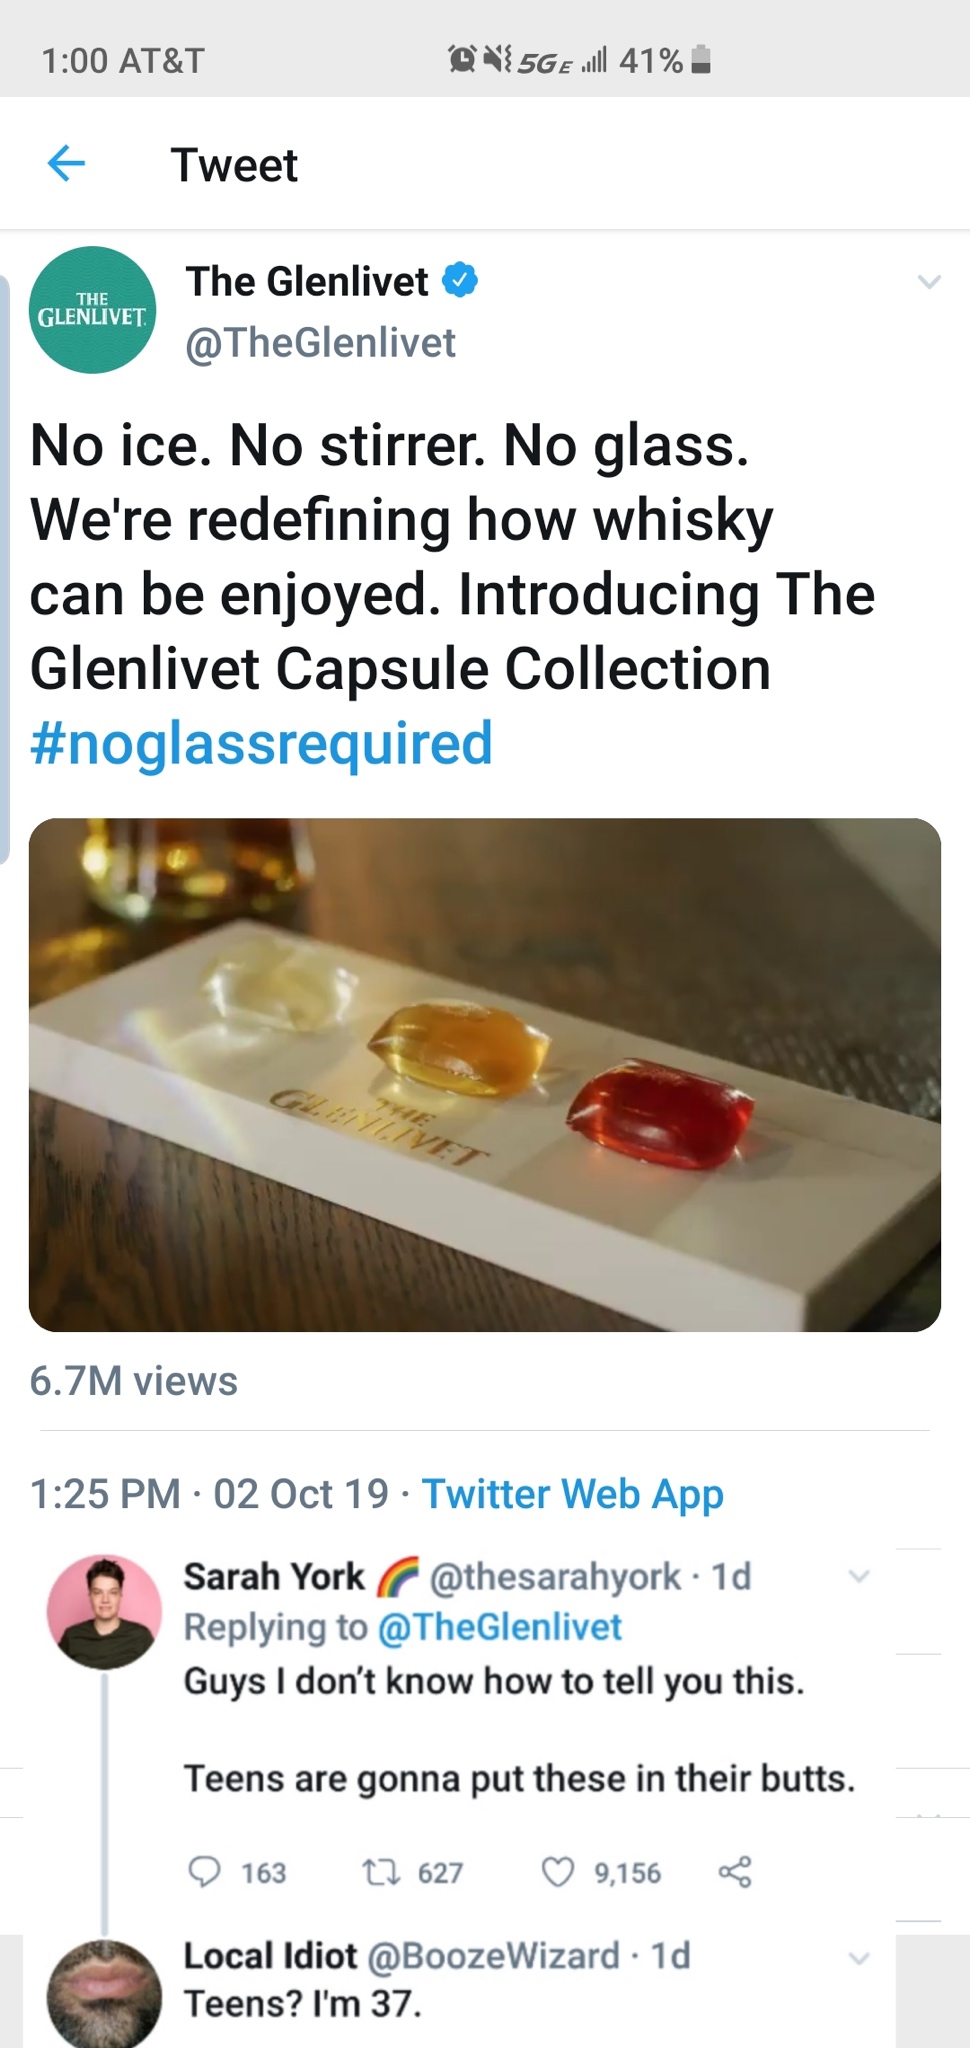 glenlivet pods up the butt - At&T @{5GE wll 41% Tweet The Glenlivet The Glenlivet No ice. No stirrer. No glass. We're redefining how whisky can be enjoyed. Introducing The Glenlivet Capsule Collection 6.7M views 02 Oct 19 Twitter Web App Sarah York . 1d G